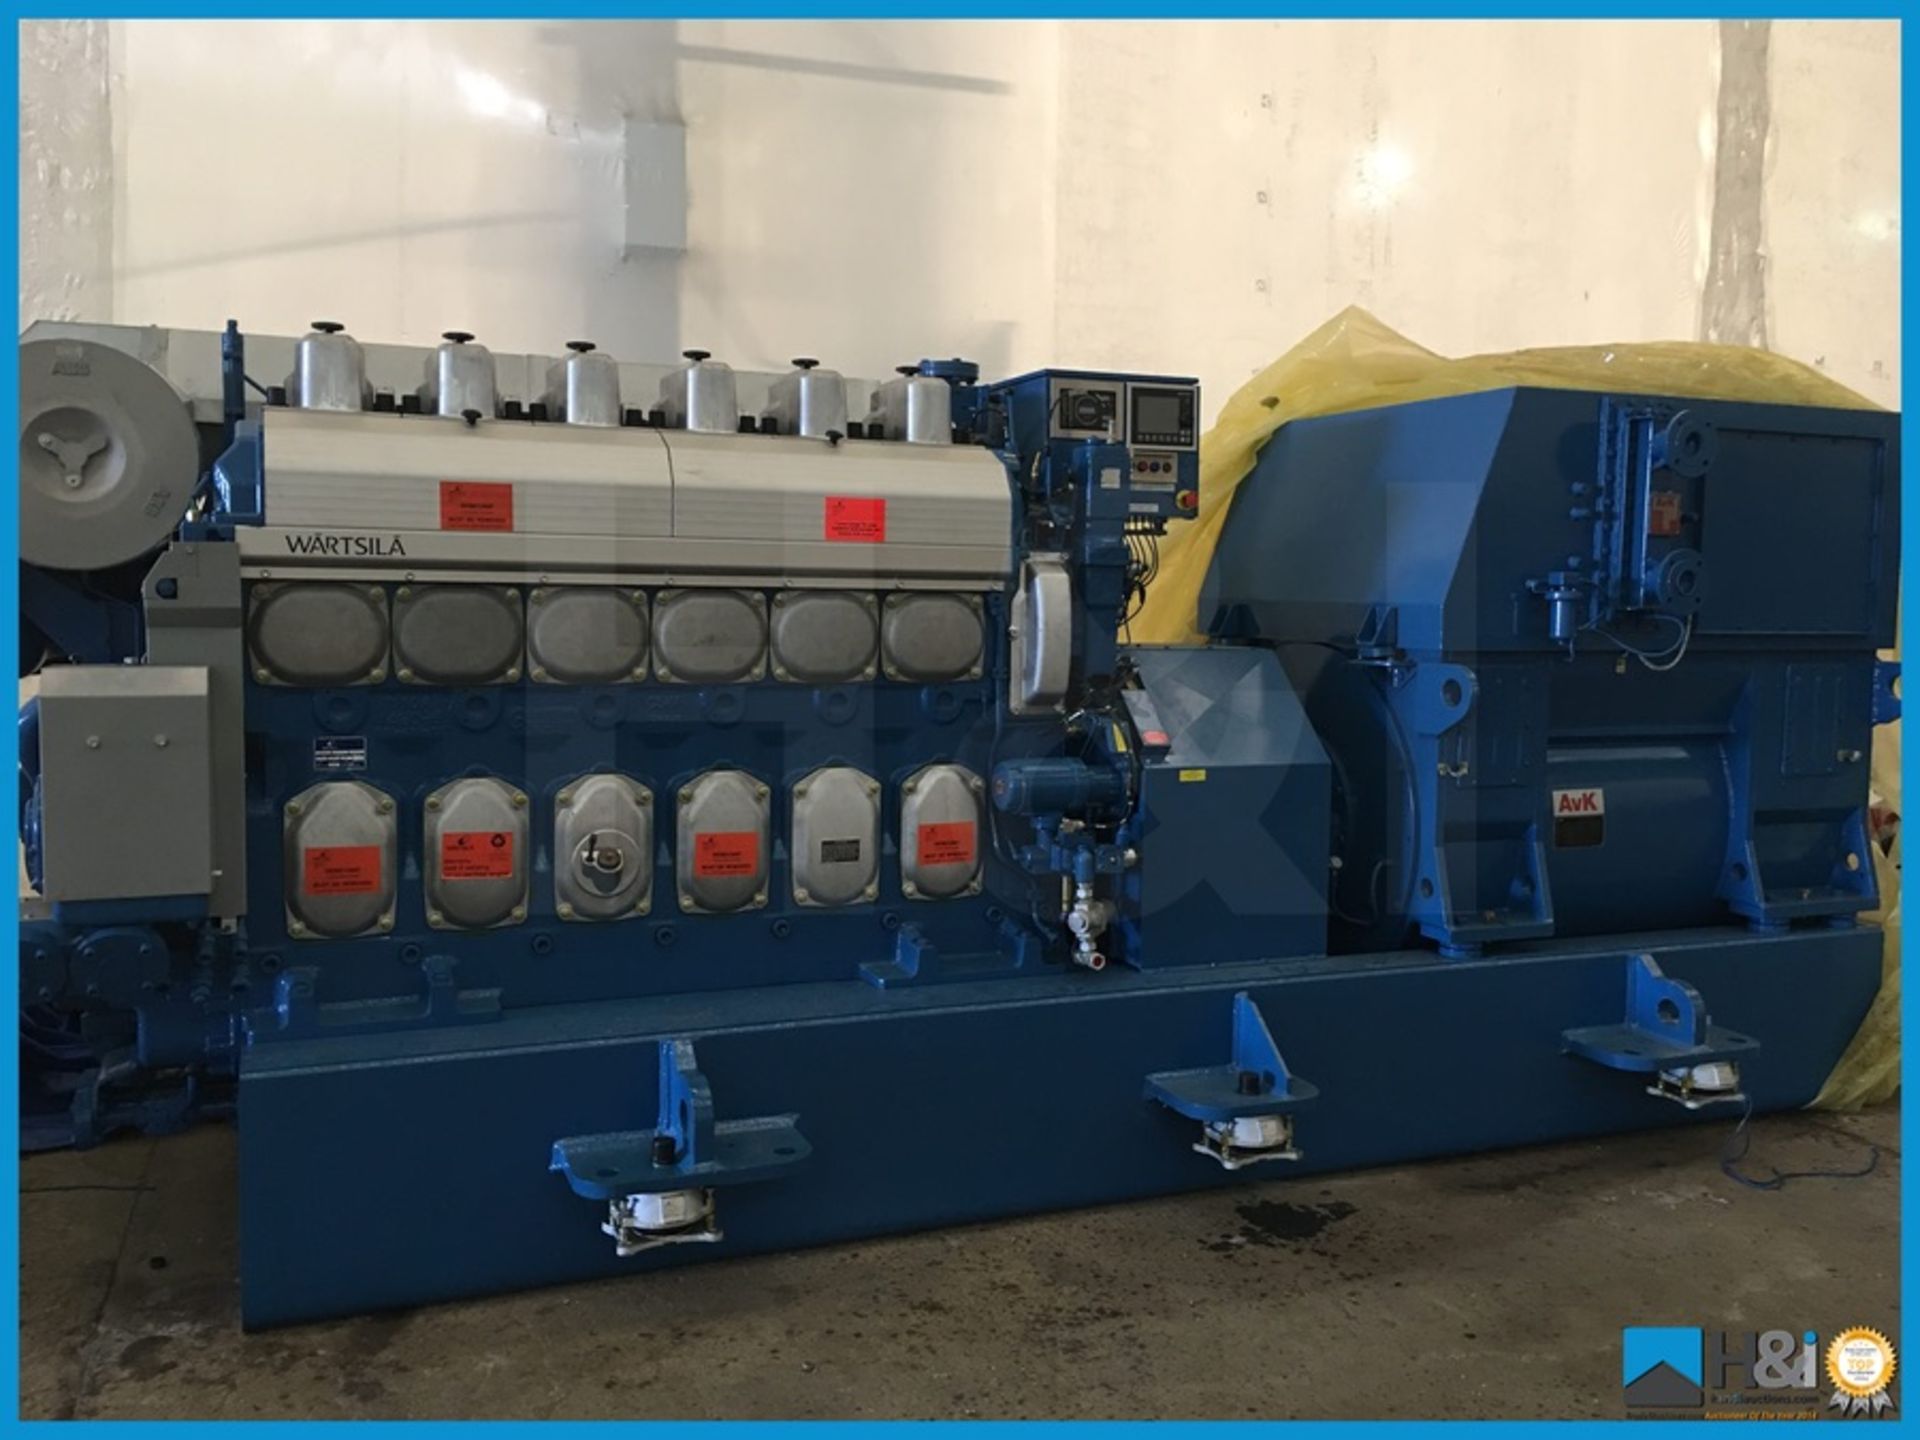 Unused Wartsila 6L20 high capacity diesel generator manufactured in 2013 for a large marine